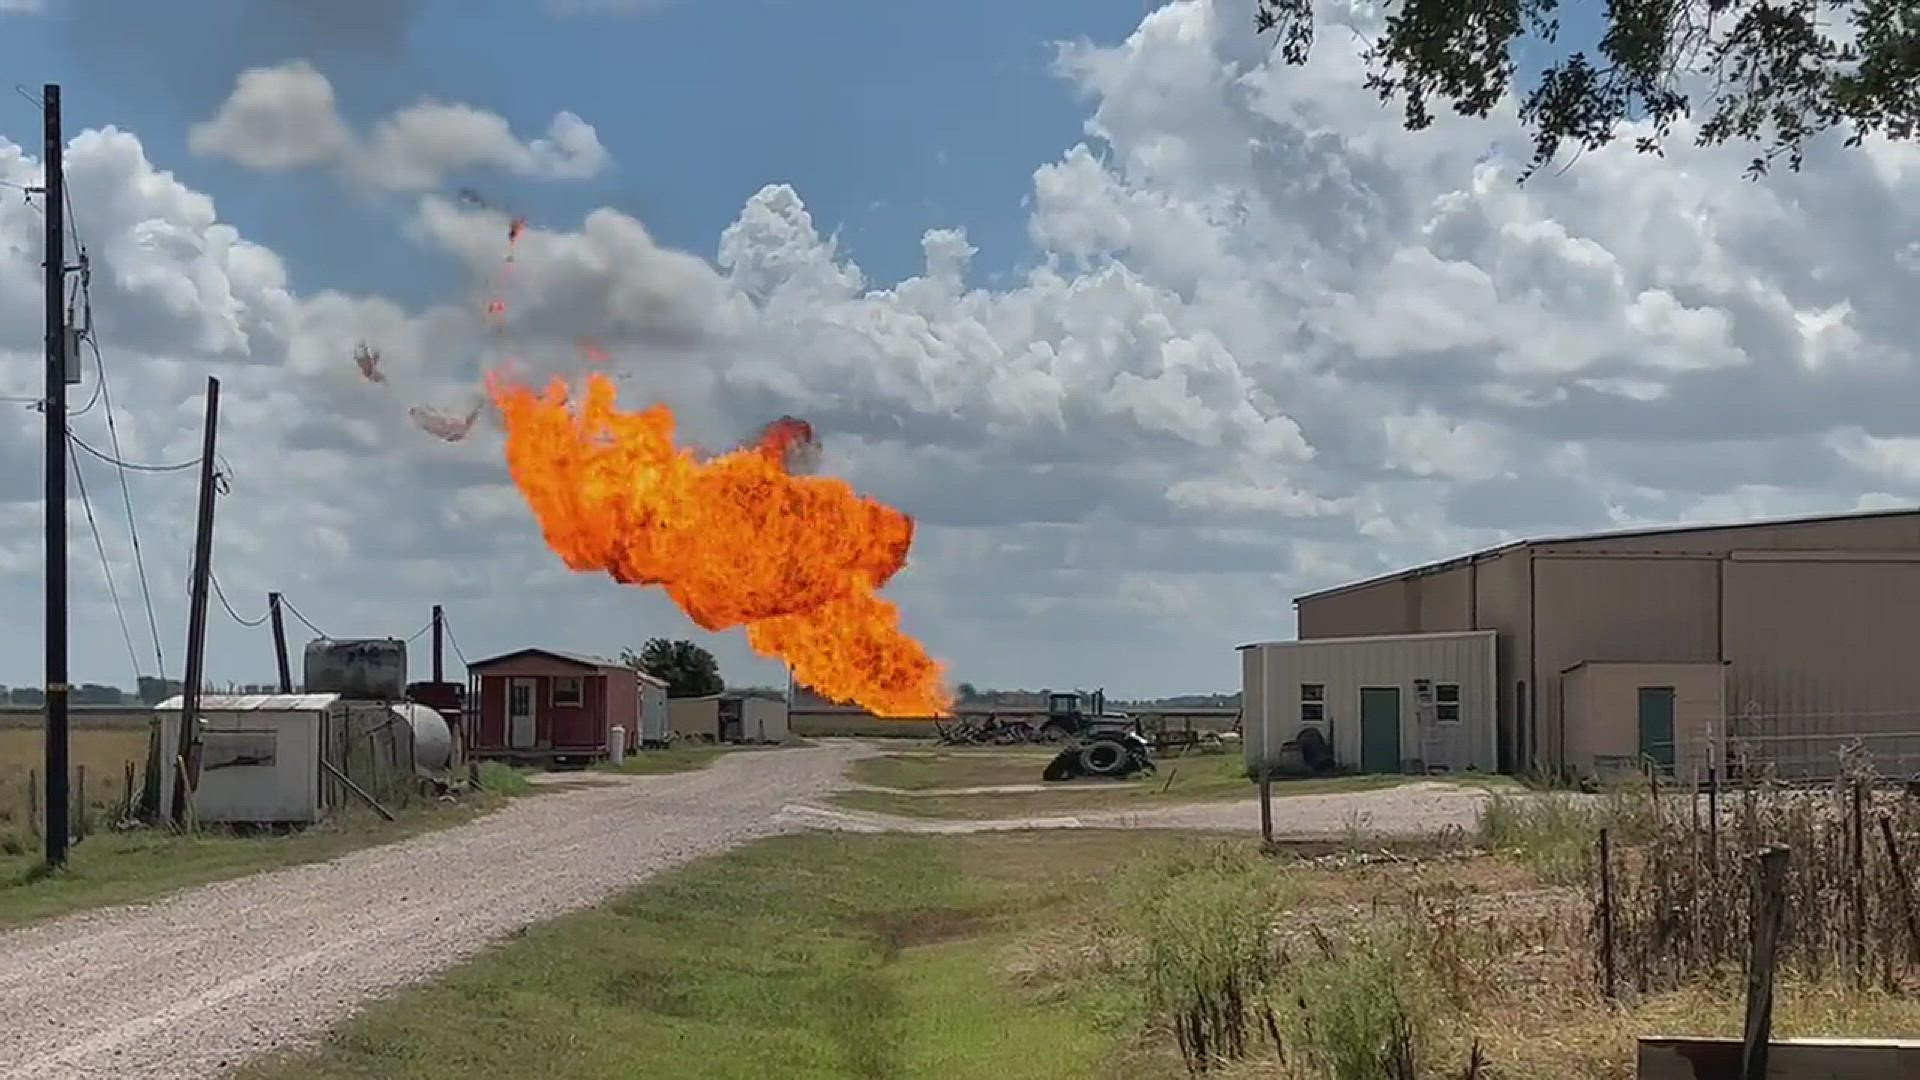 Emergency crews have responded to a pipeline explosion just west of Orchard in west Fort Bend County Thursday morning.